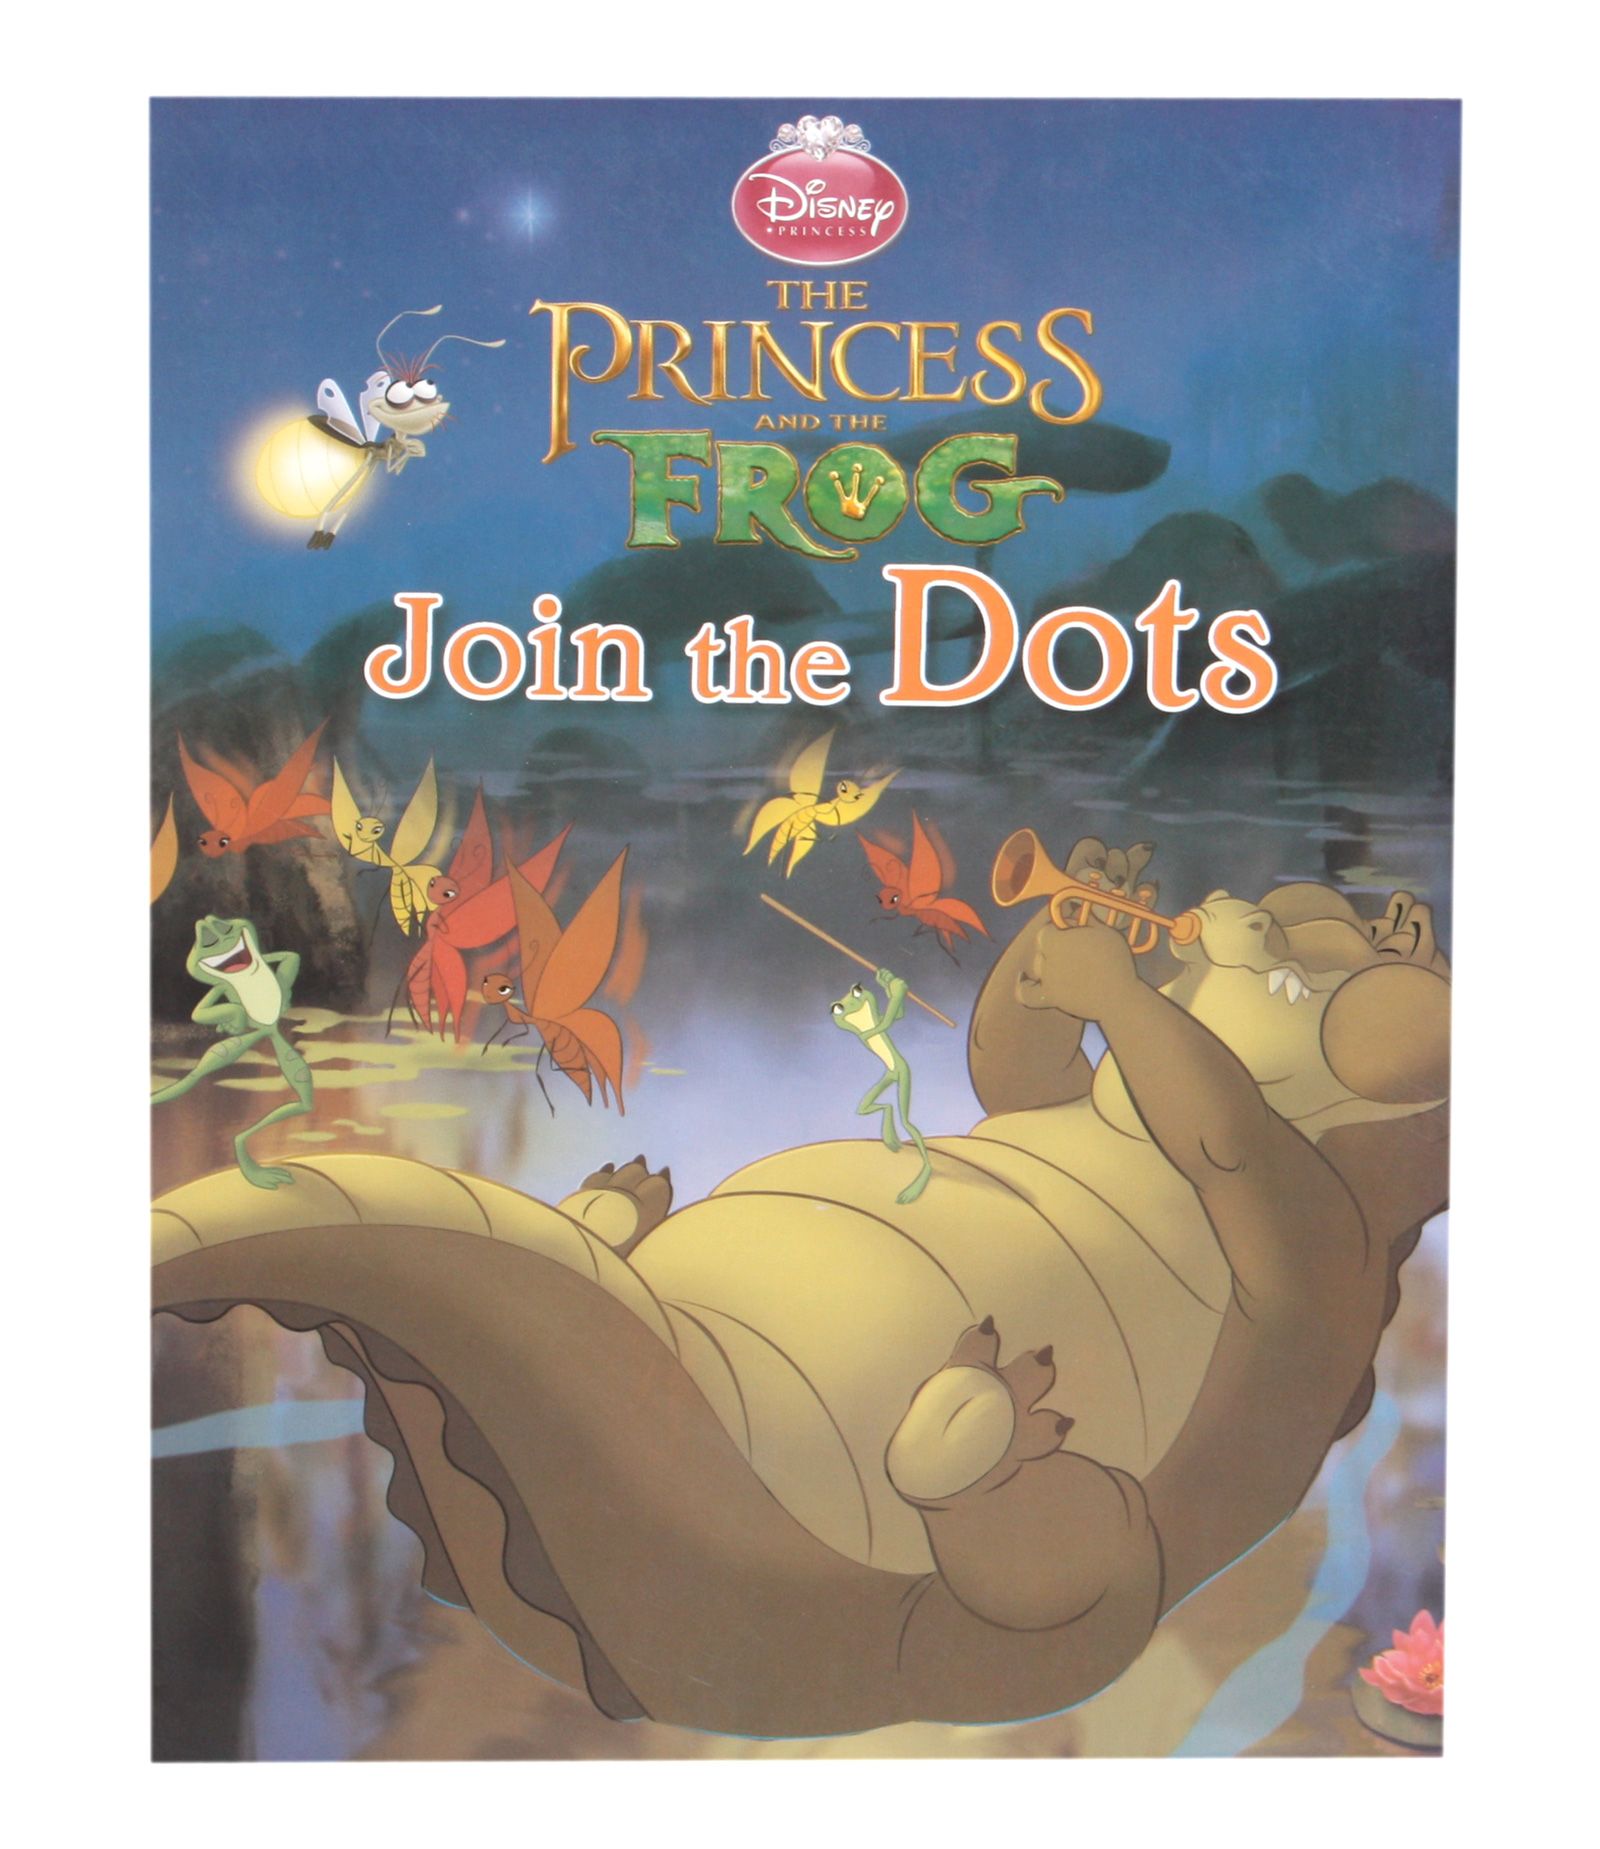 The Princess and Frog - Join the Dots